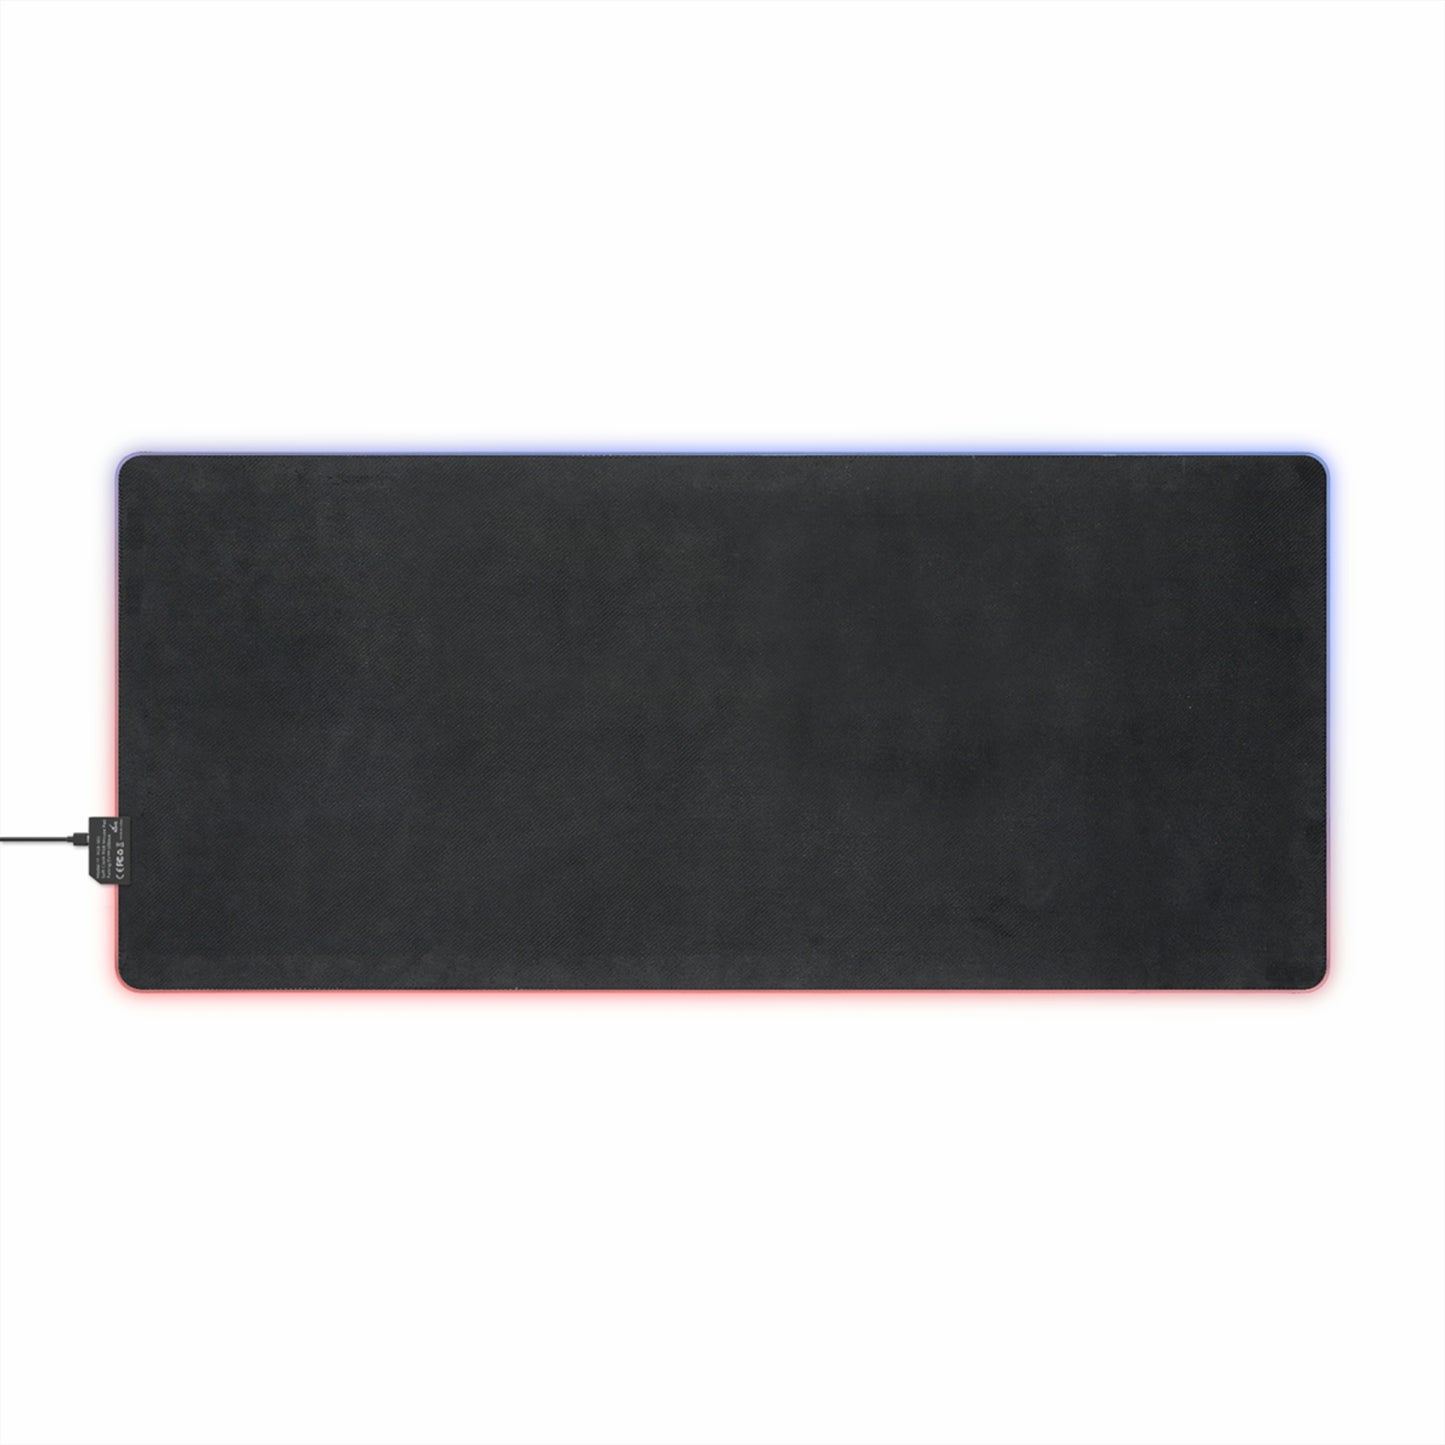 LED Gaming Mouse Pad Rose Flair 4